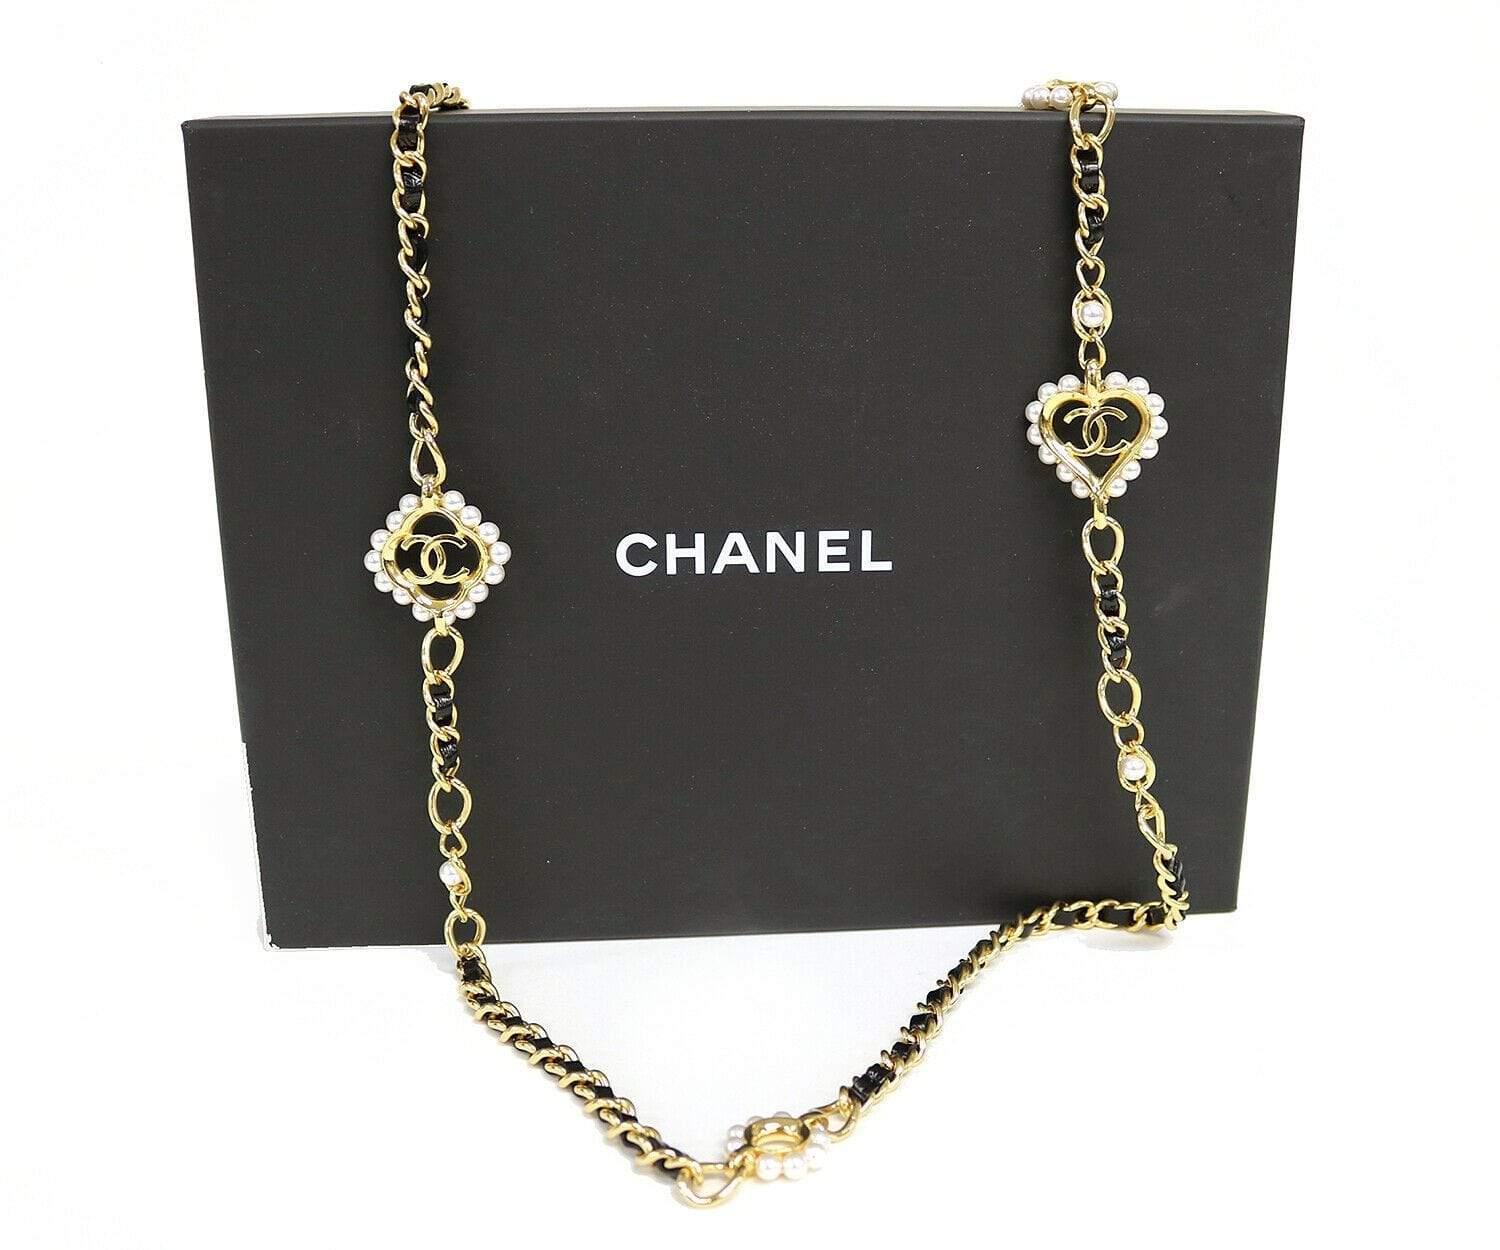 Chanel Heart CC Pearl and Leather Necklace
Necklace Width: Approx. 8.0 MM
Station Width: Approx. 35.0 MM
Necklace Length: Approx. 38.0 Inches
Weight: Approx. 118.20 Grams
Stamped: ©CHANEL, A19, MADE IN FRANCE

Condition:
Offered in consideration is